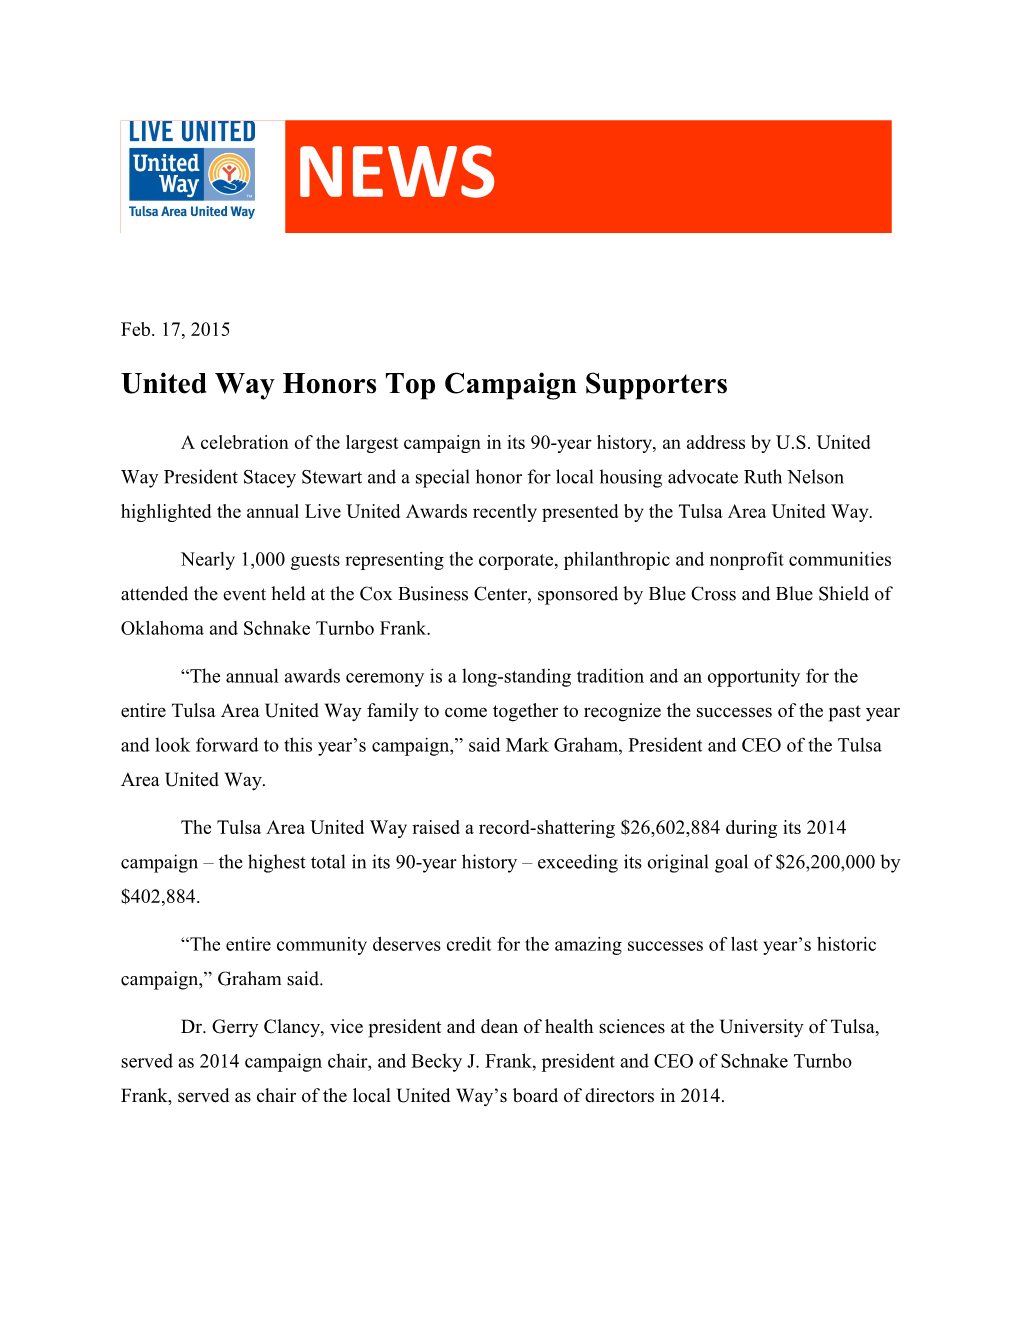 United Way Honors Top Campaign Supporters